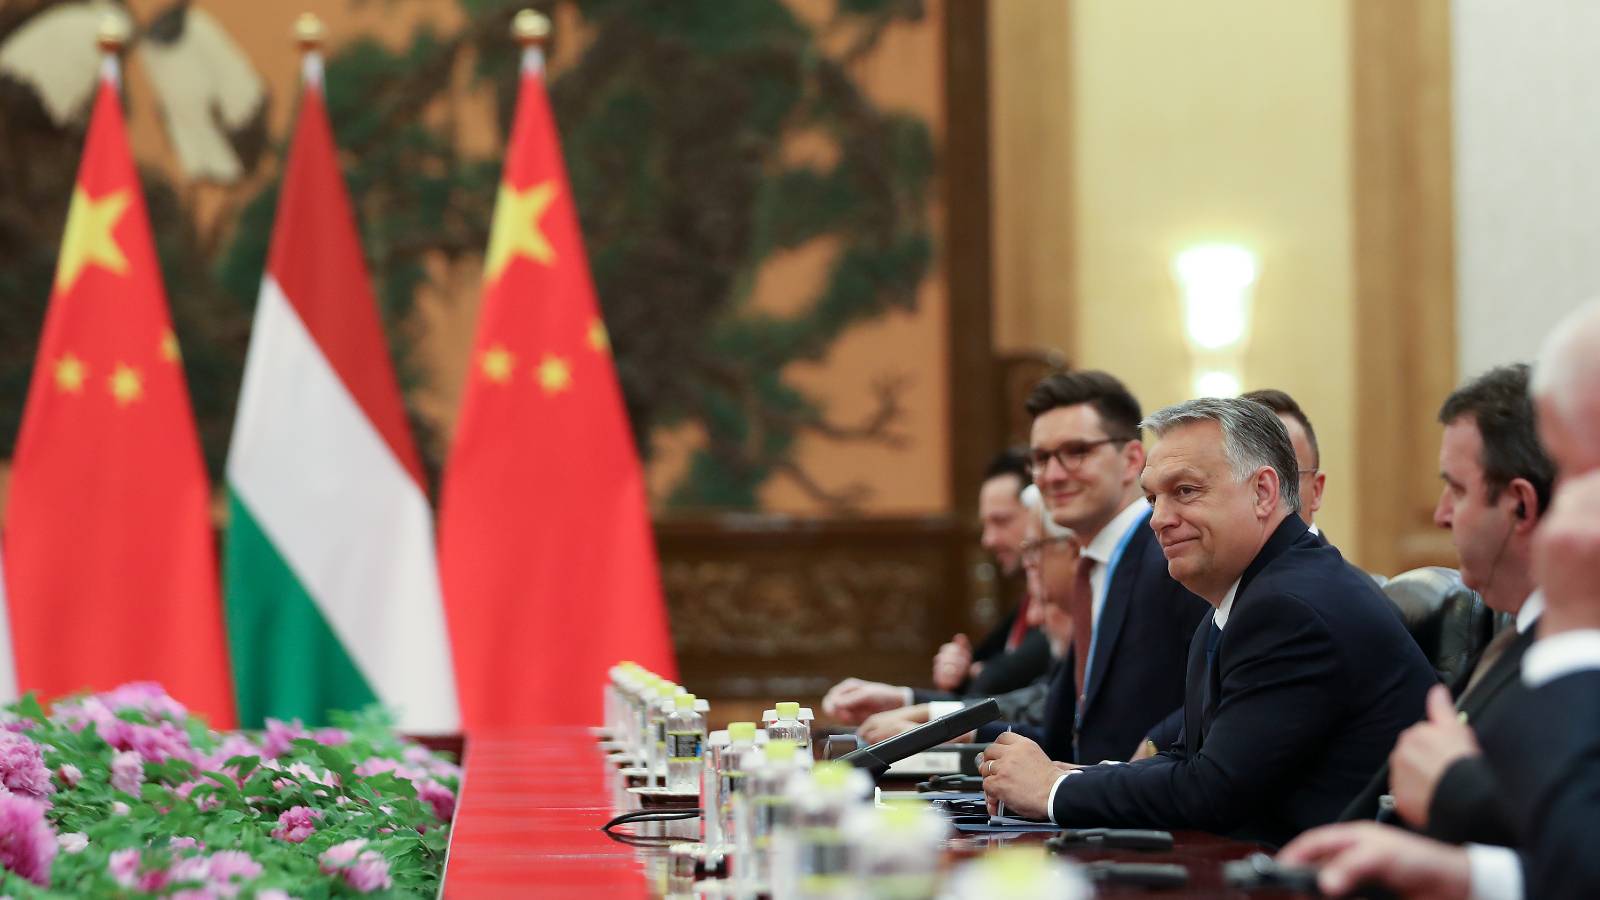 Chinese President Xi Jinping shakes hands with Hungarian Prime Minister Viktor Orban before the bilateral meeting of the Second Belt and Road Forum at the Great Hall of the People, in Beijing, China April 25, 2019. Andrea Verdelli/Pool via REUTERS